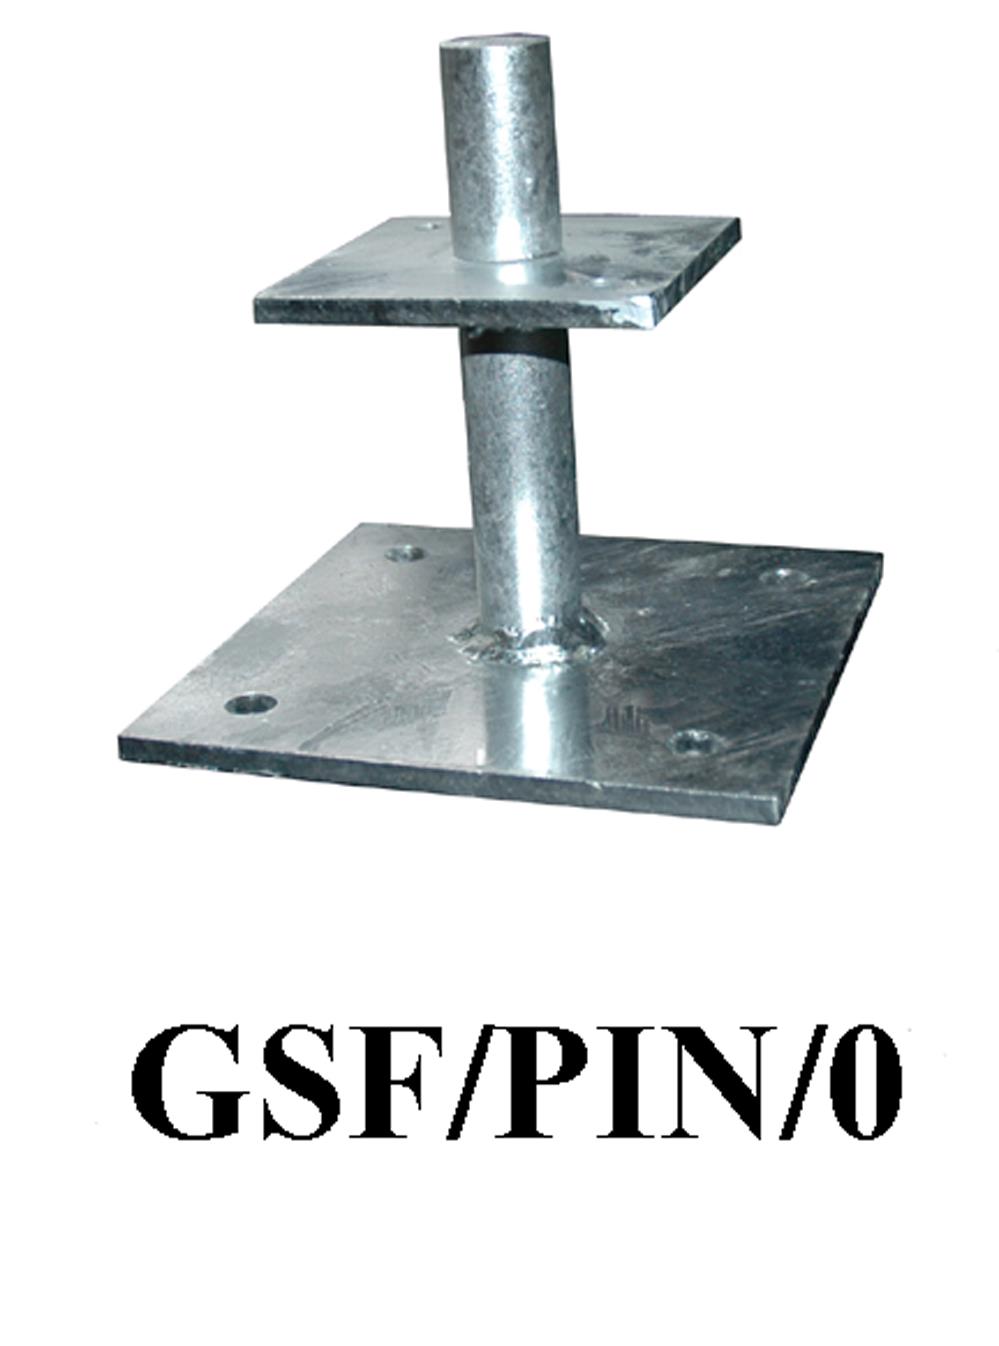 Galvanised Steel Flanged Pin 150mm high receives post size 100mm x 100mm or 125mm x 125mm GSF-PIN0